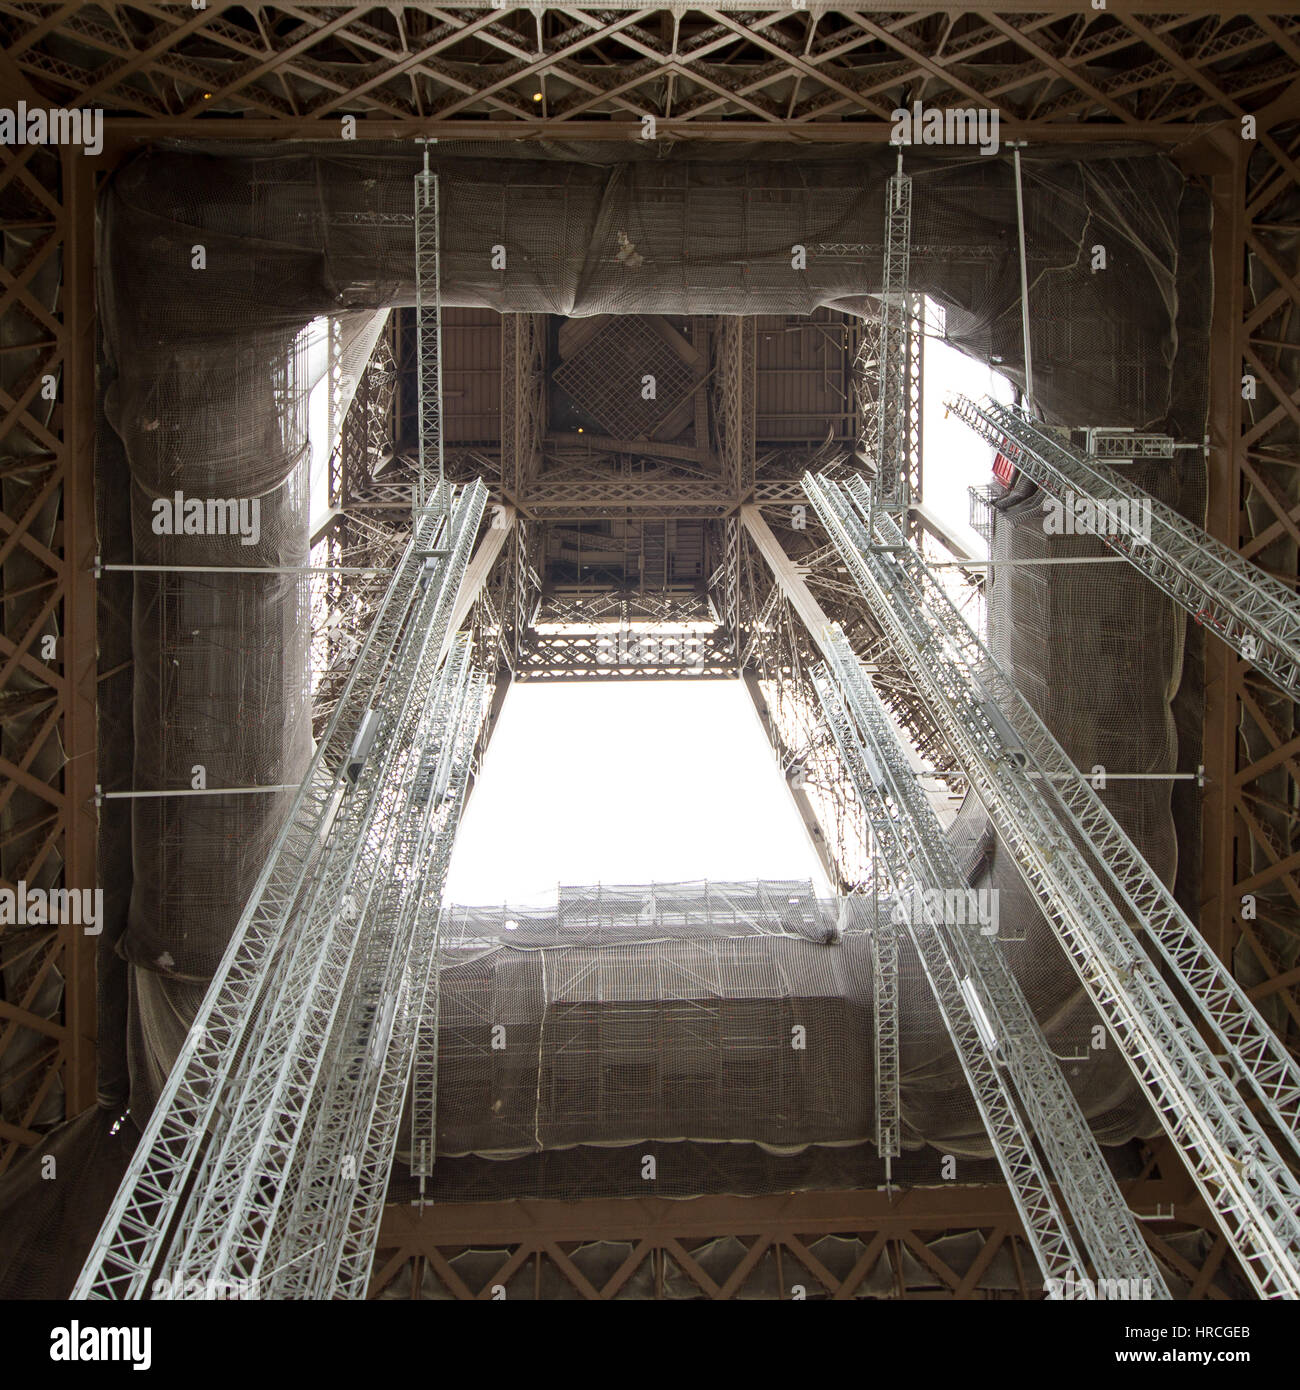 Full frame image of metal structures inside Eiffel Tower in Paris, view from below Stock Photo